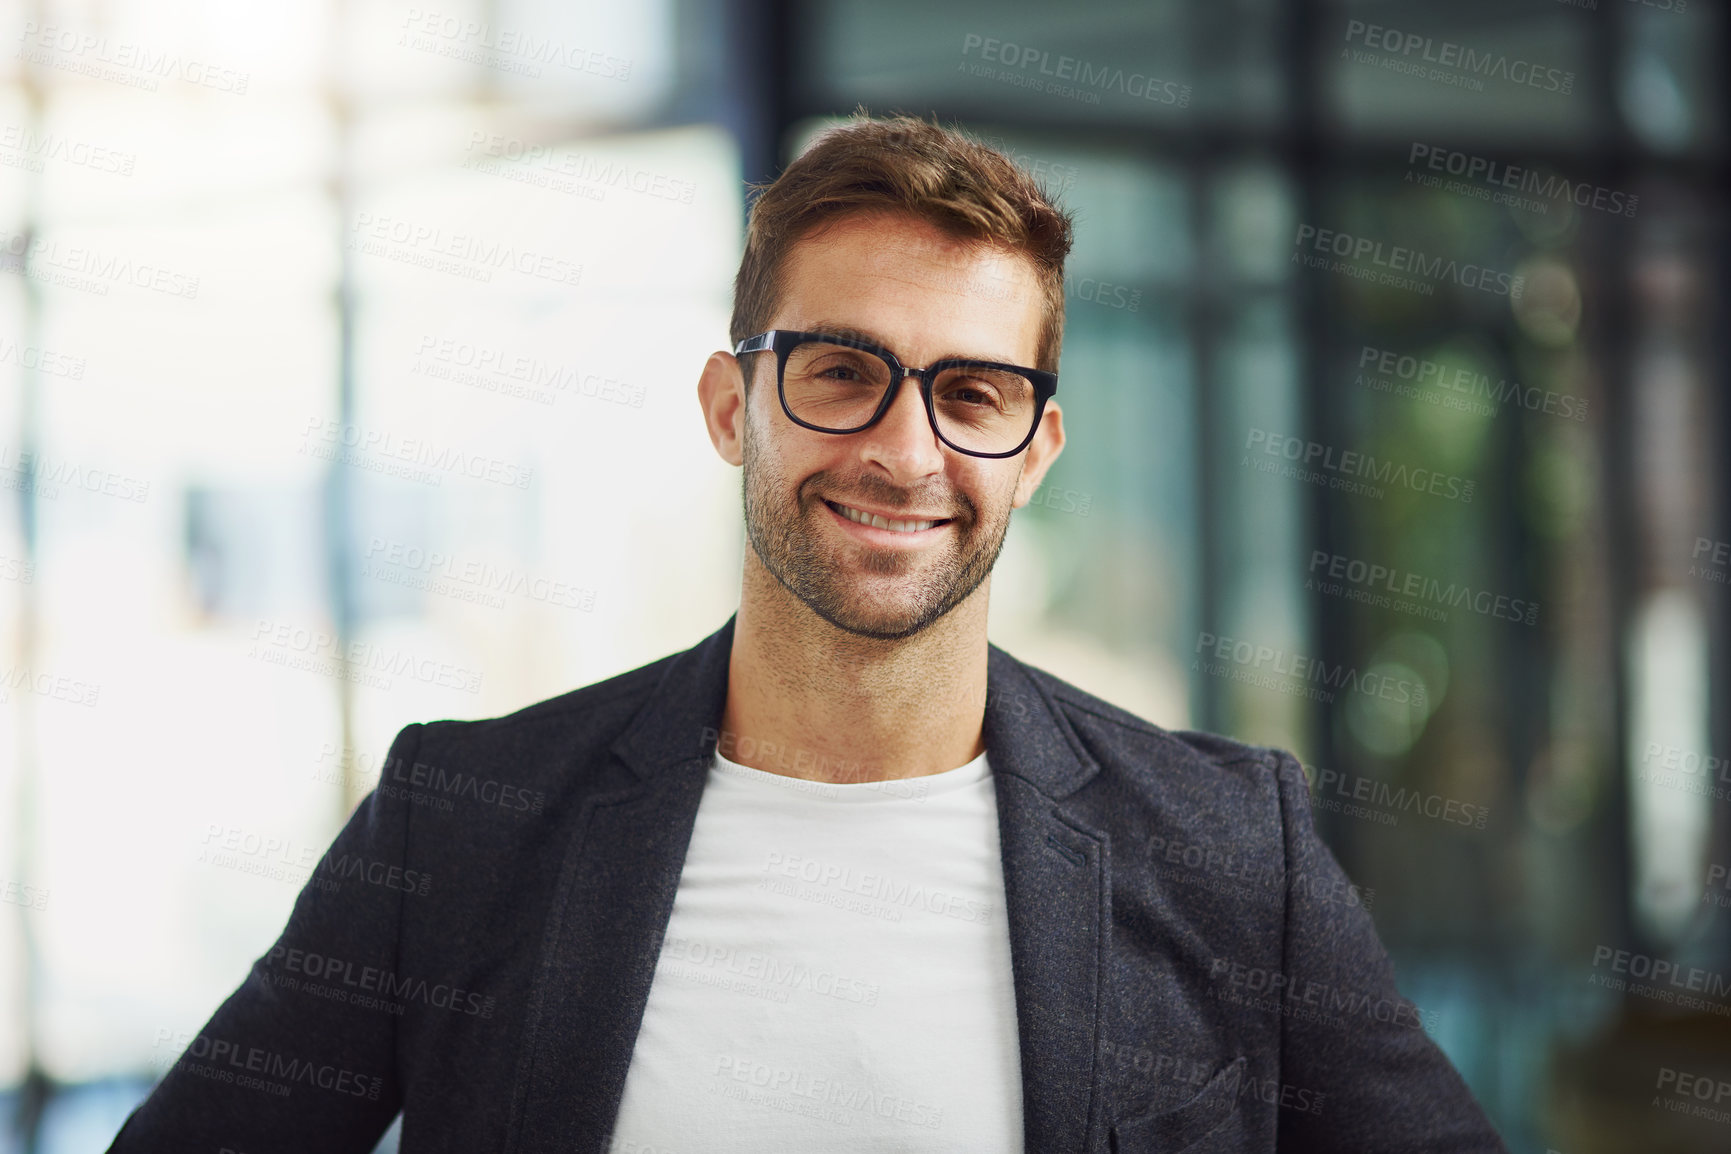 Buy stock photo Portrait shot of a handsome businessman at the office